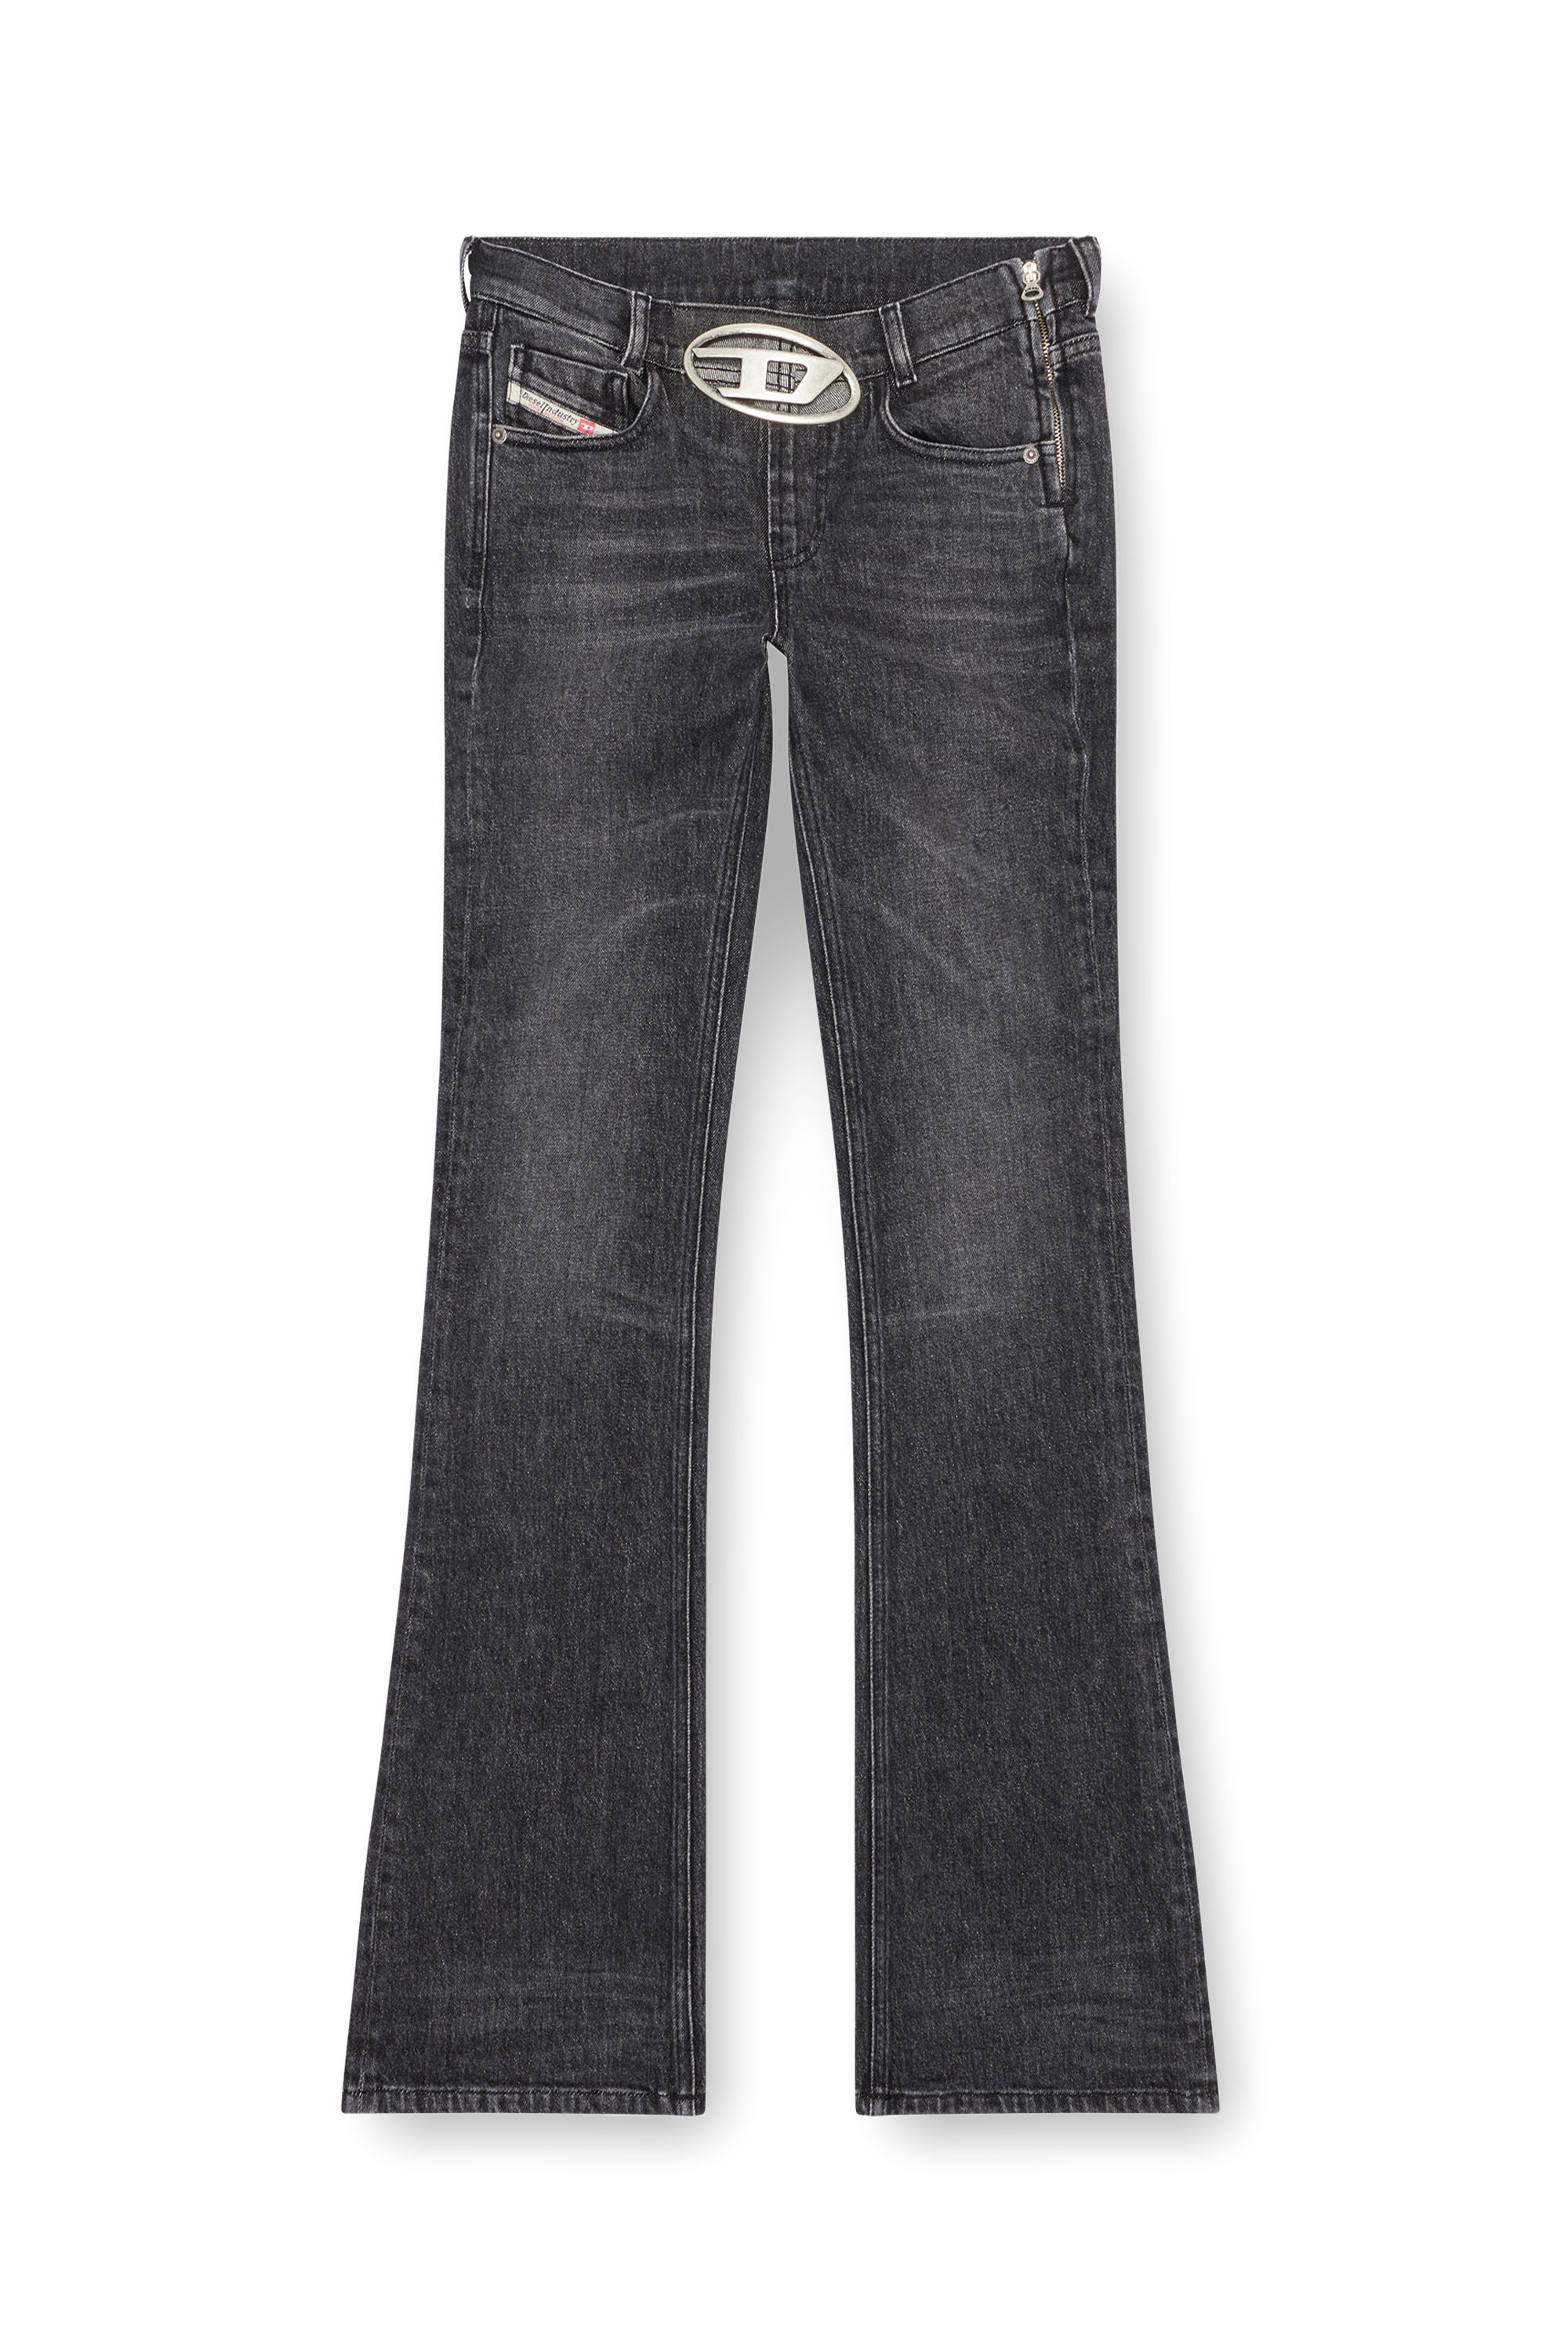 Diesel - Bootcut and Flare Jeans 1969 D-Ebbey 0CKAH, Mujer Bootcut y Flare Jeans - 1969 D-Ebbey in Negro - Image 3